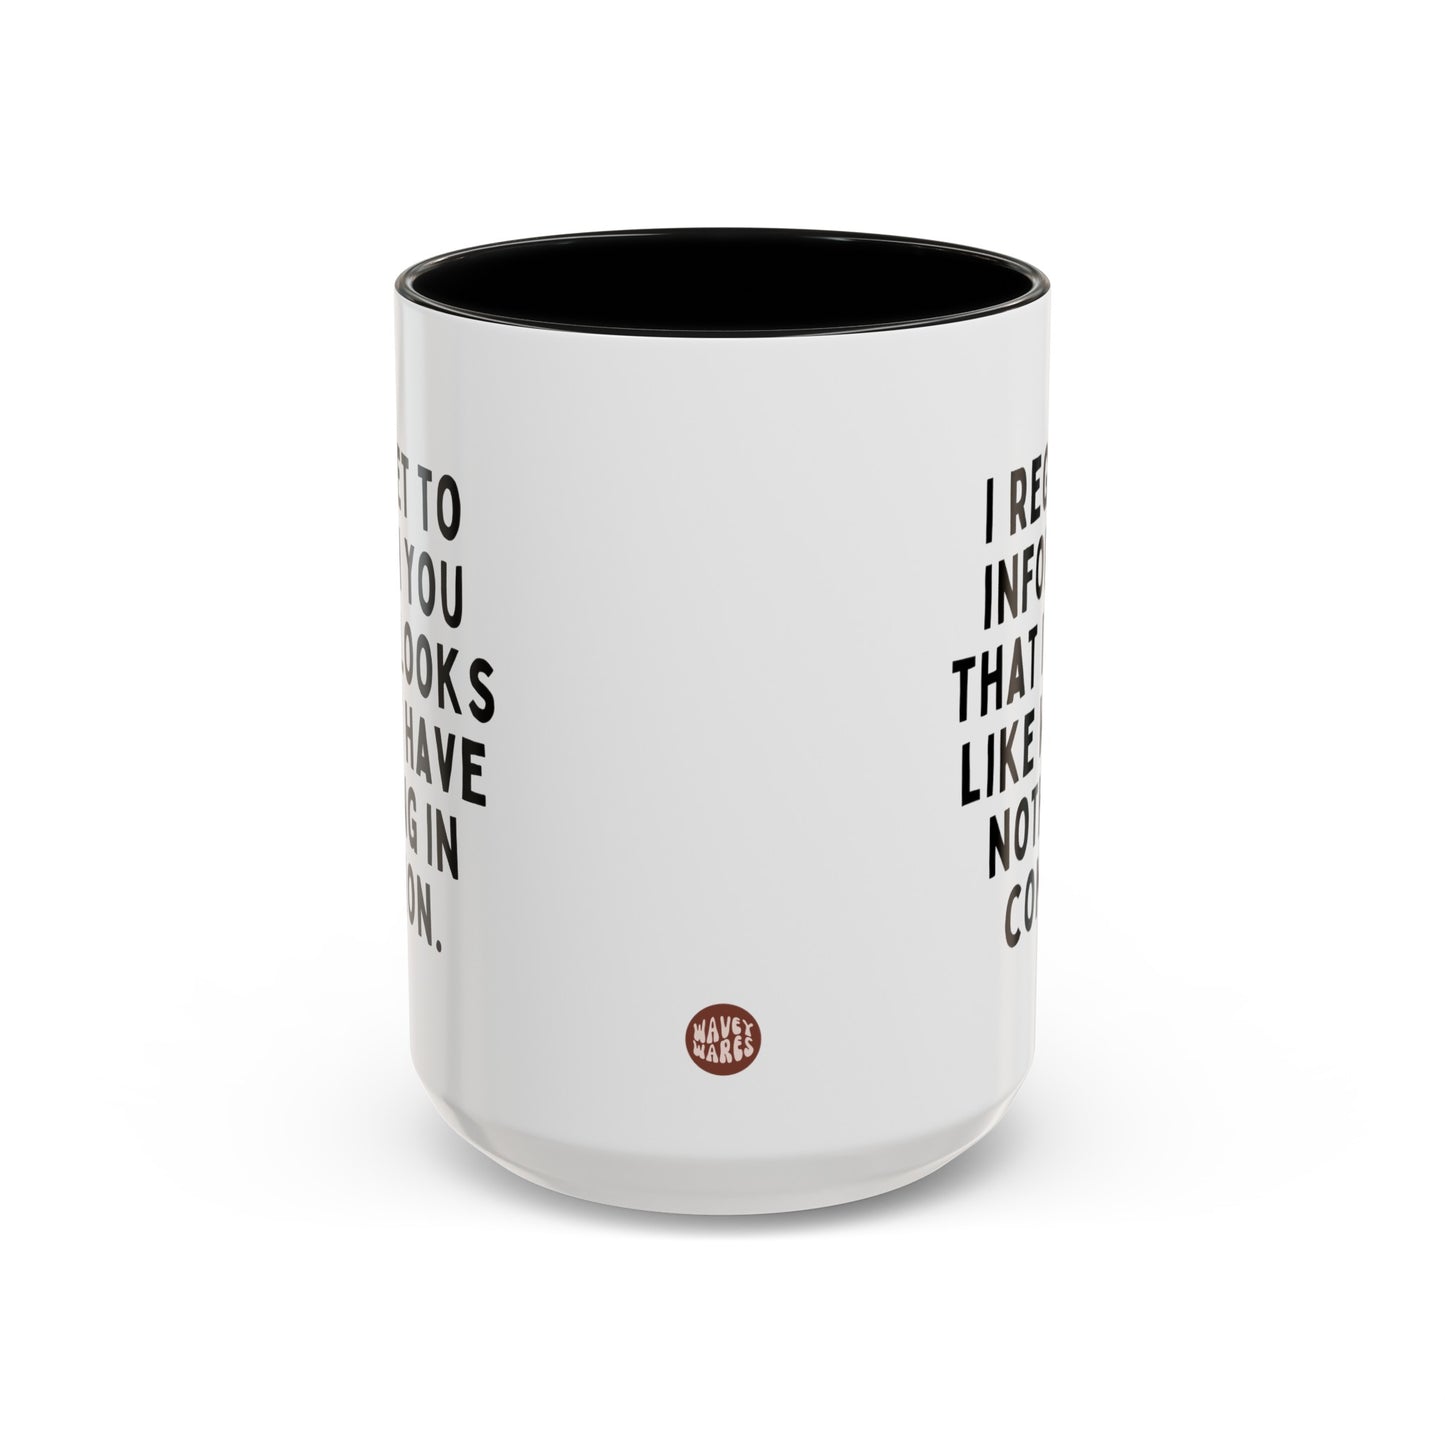 I Regret To Inform You That It Looks Like We Have Nothing In Common 15oz white with black accent funny large coffee mug gift for coworker best friend sarcastic sarcasm secret santa colleague waveywares wavey wares wavywares wavy wares side